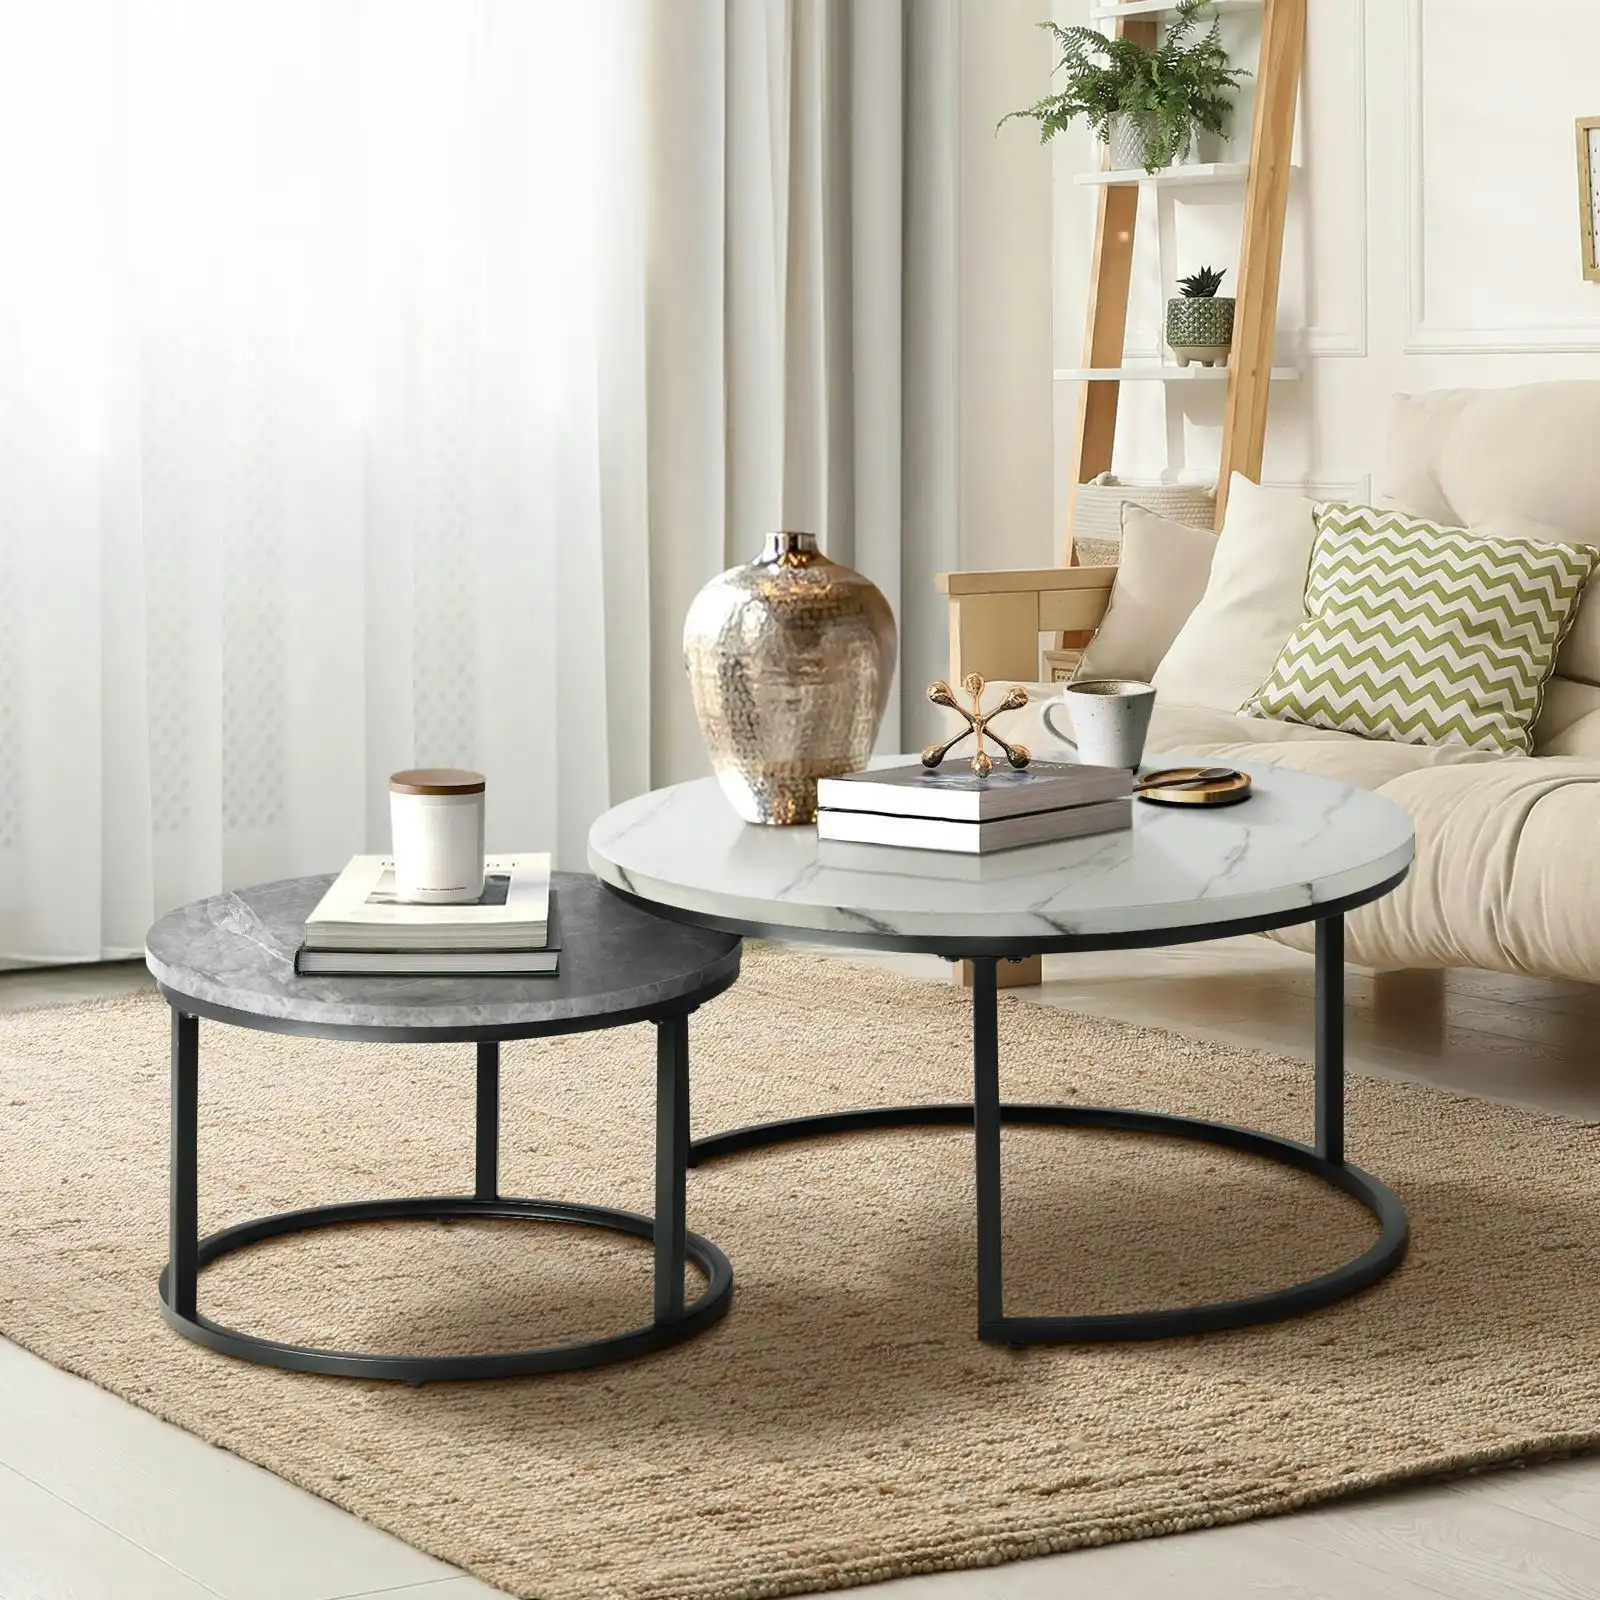 Oikiture Set of 2 Coffee Table Round Nesting Side End Table White and Grey